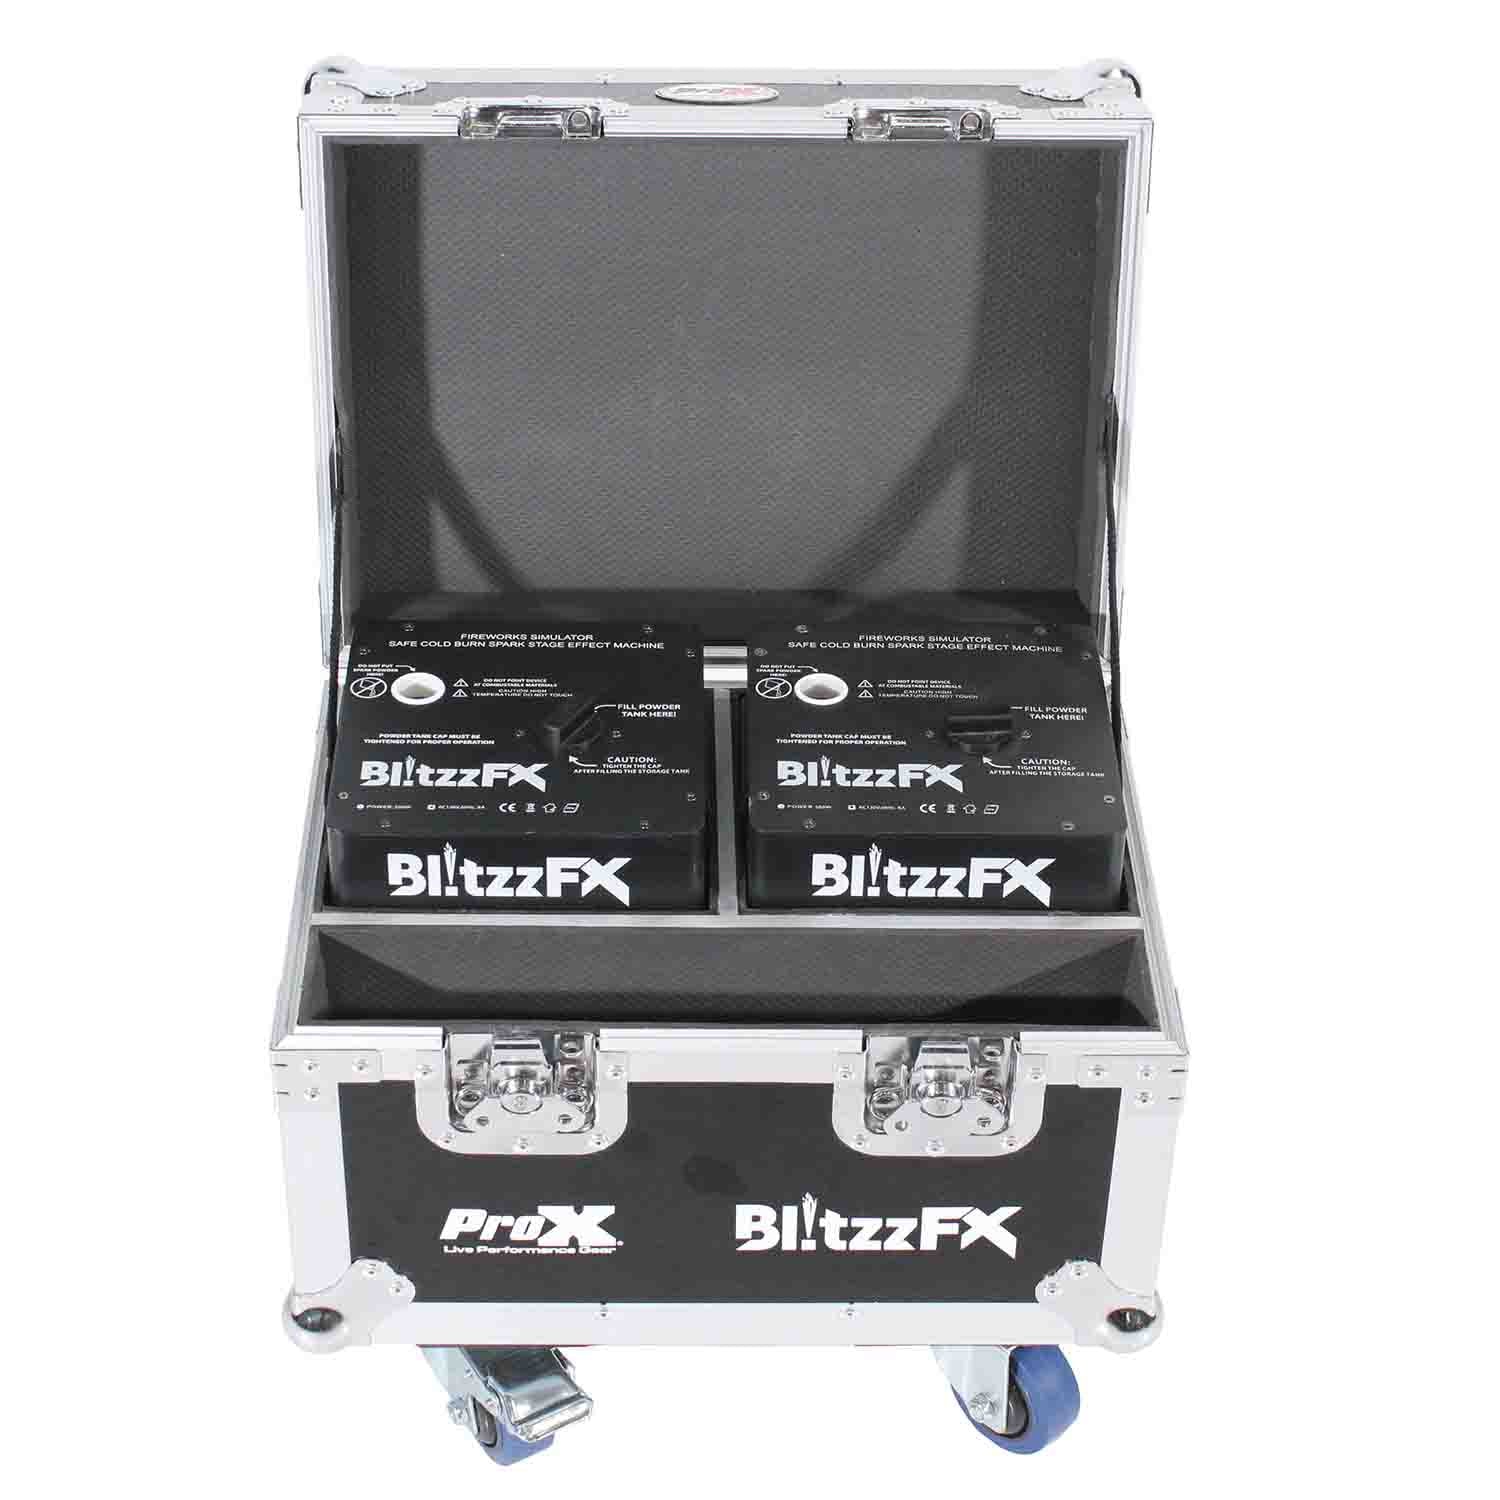 ProX X-BLITZZFX X2 Blitzz FX Set of Two Smaller Model Cold Spark Machines with Flight Case - Hollywood DJ